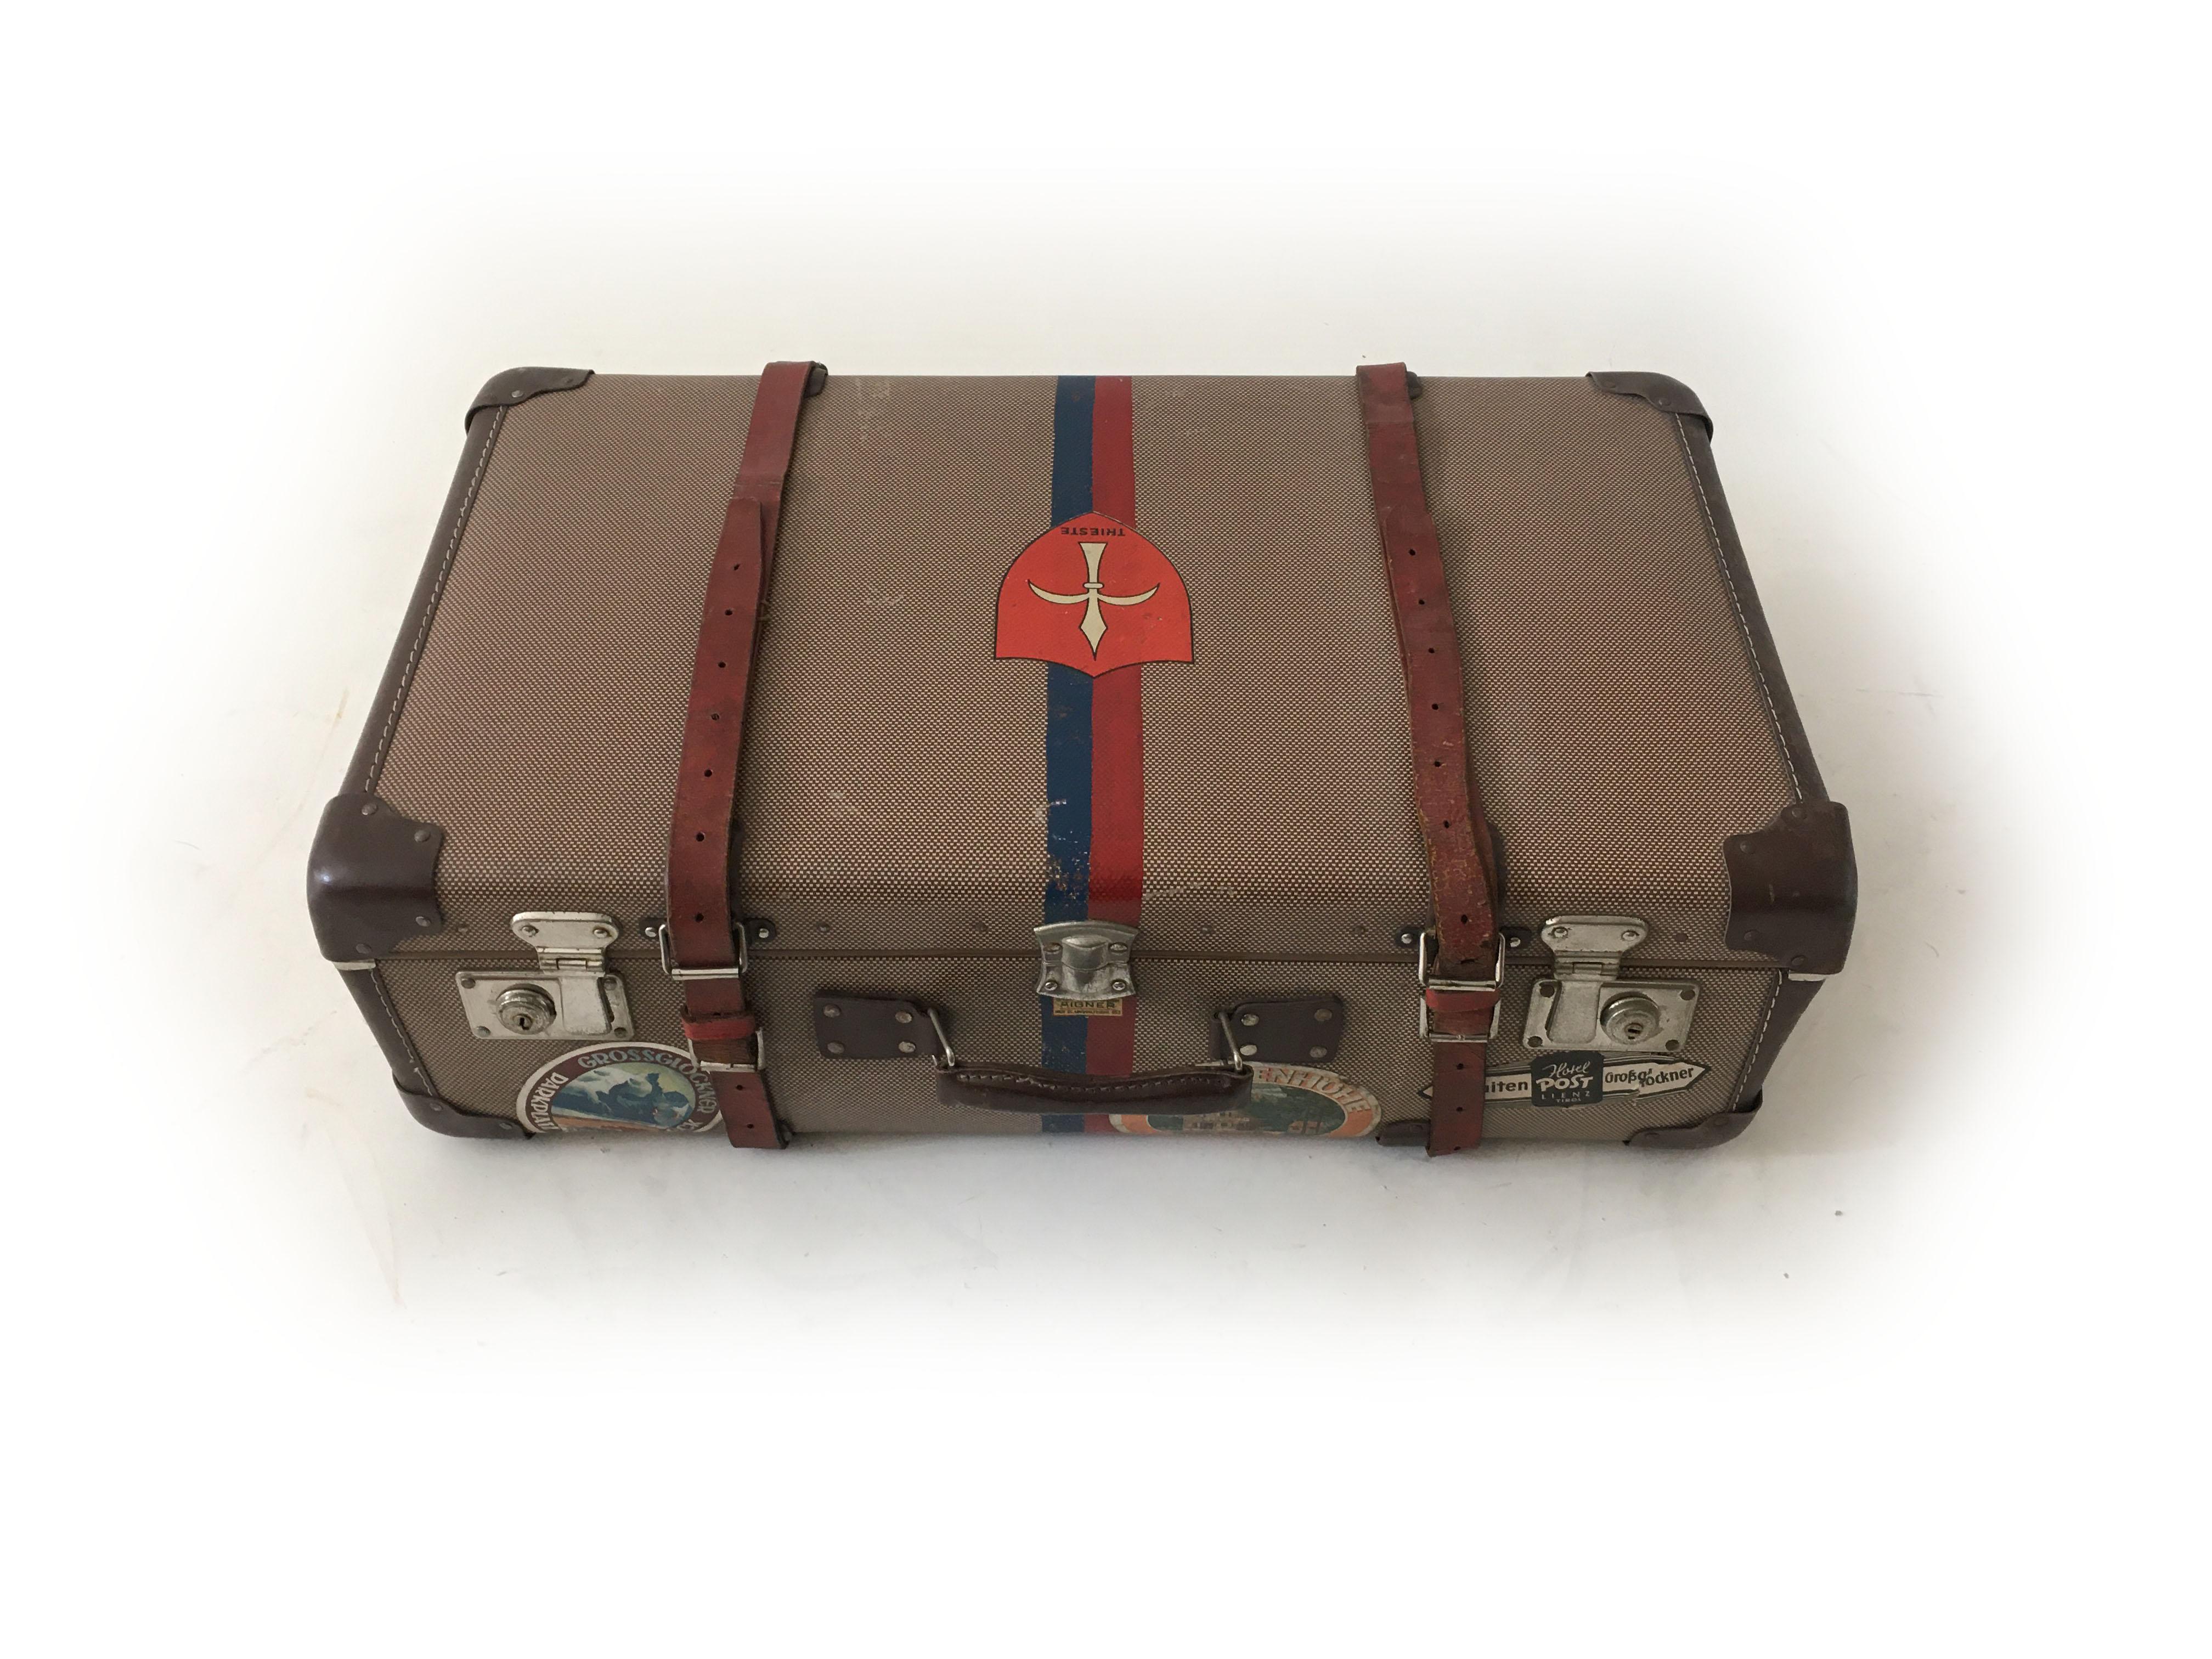 Adler Koffer Luggage with Painted Coat of Arms, Crest of Trieste, Austria 1930s 2